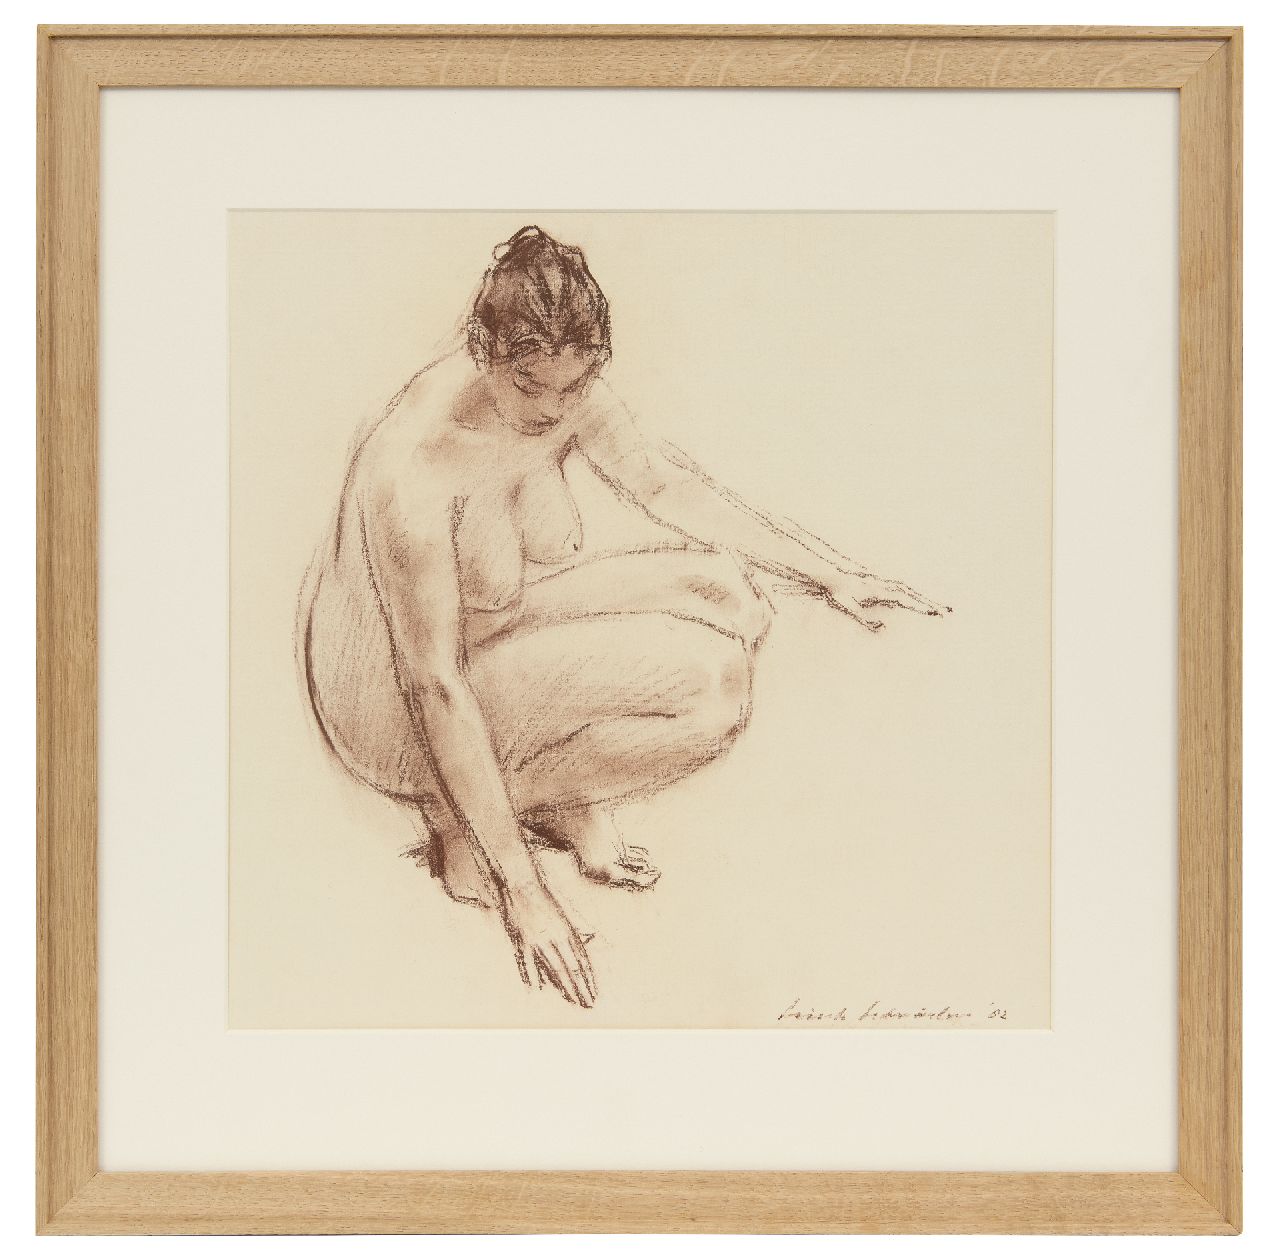 Schröder S.C.  | 'Sierk' Carl Schröder | Watercolours and drawings offered for sale | Crouched nude, chalk on paper 35.8 x 35.8 cm, signed l.r. and dated '82